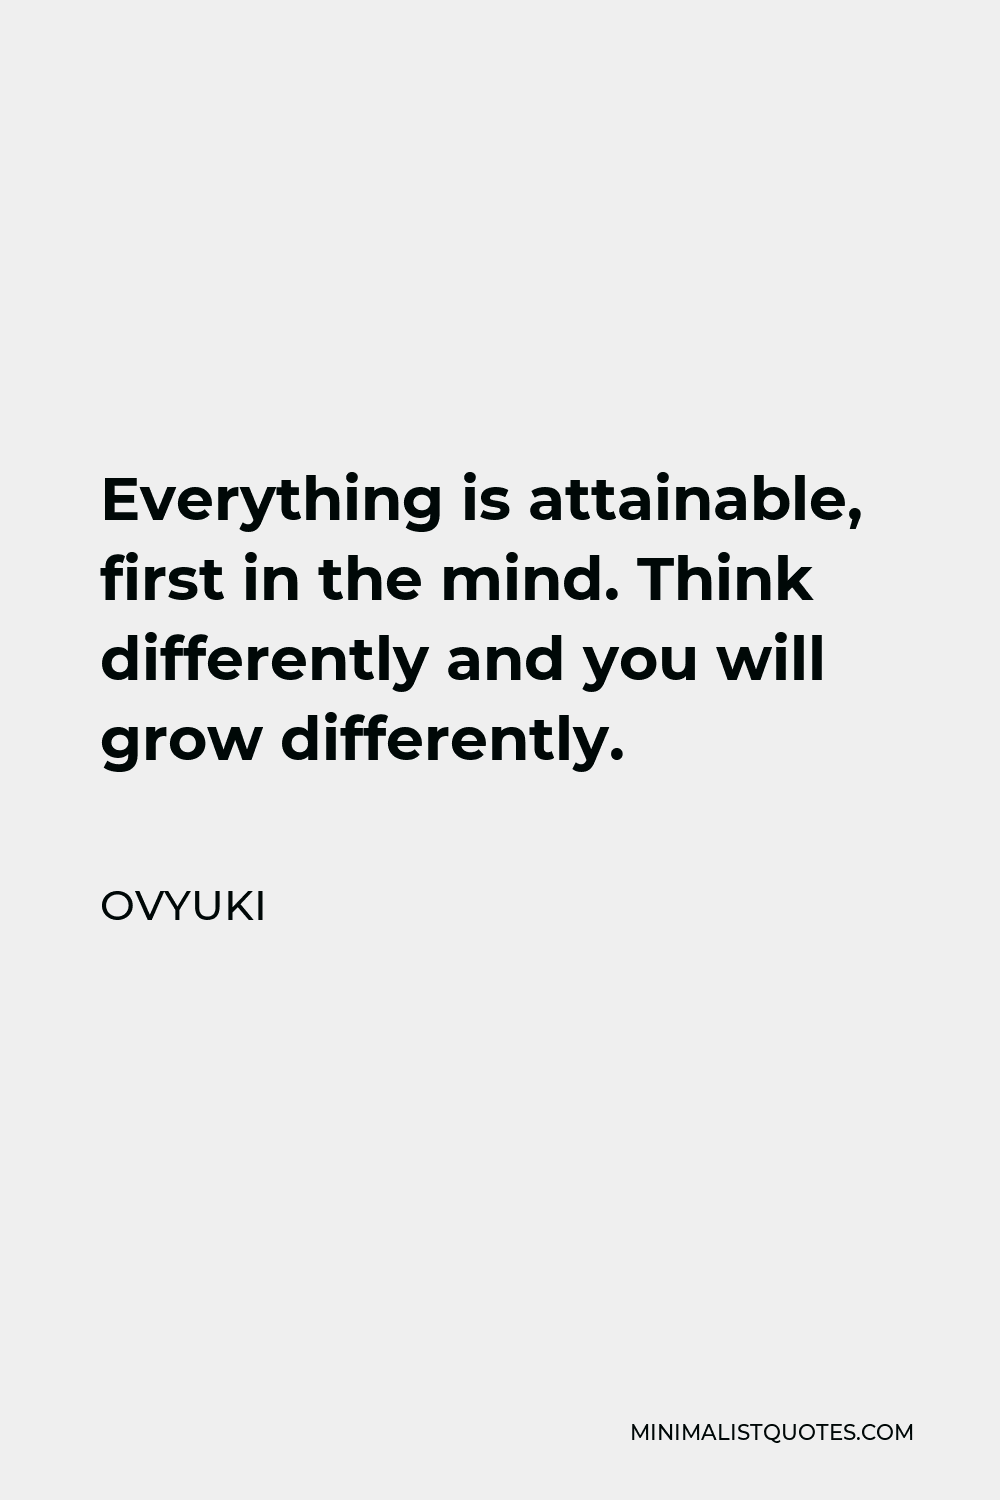 Ovyuki Quote - Everything is attainable, first in the mind. Think differently and you will grow differently.